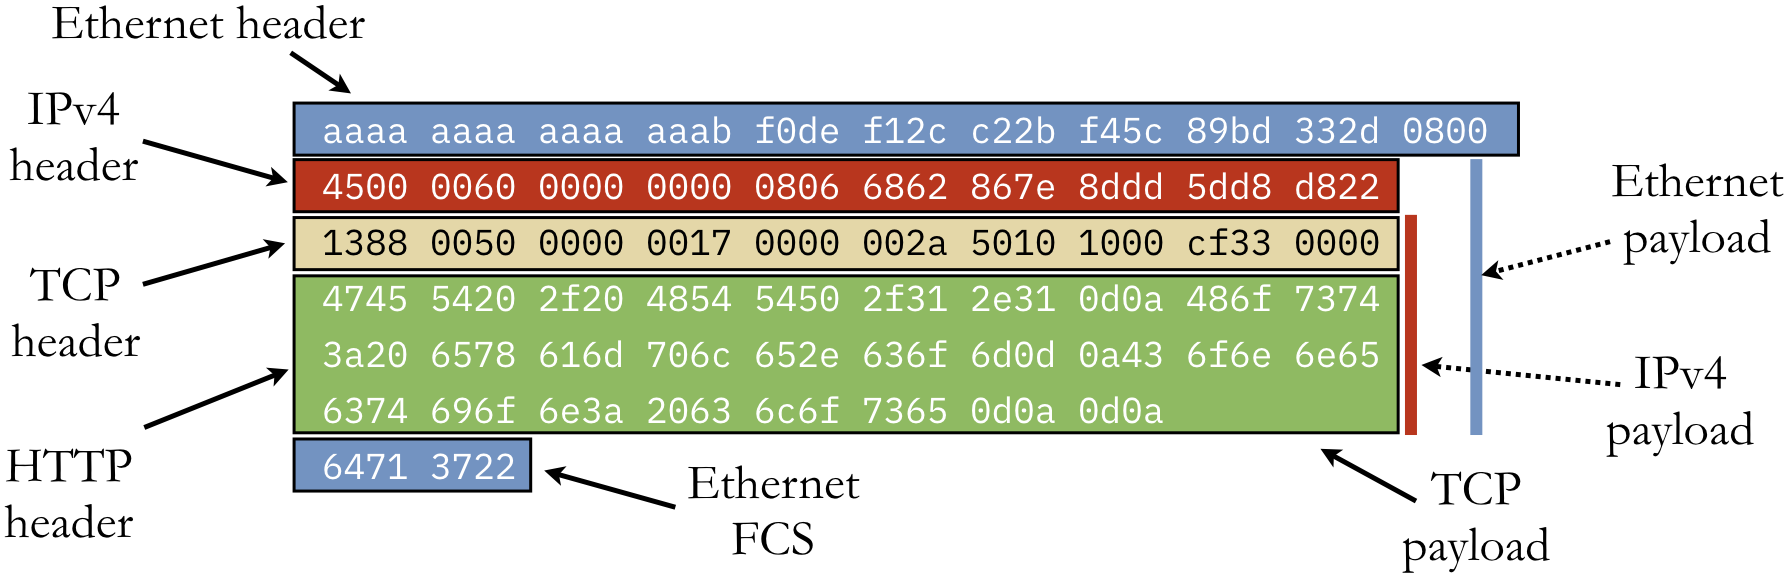 Anatomy of a complete Ethernet frame with IPv4, TCP, and HTTP data